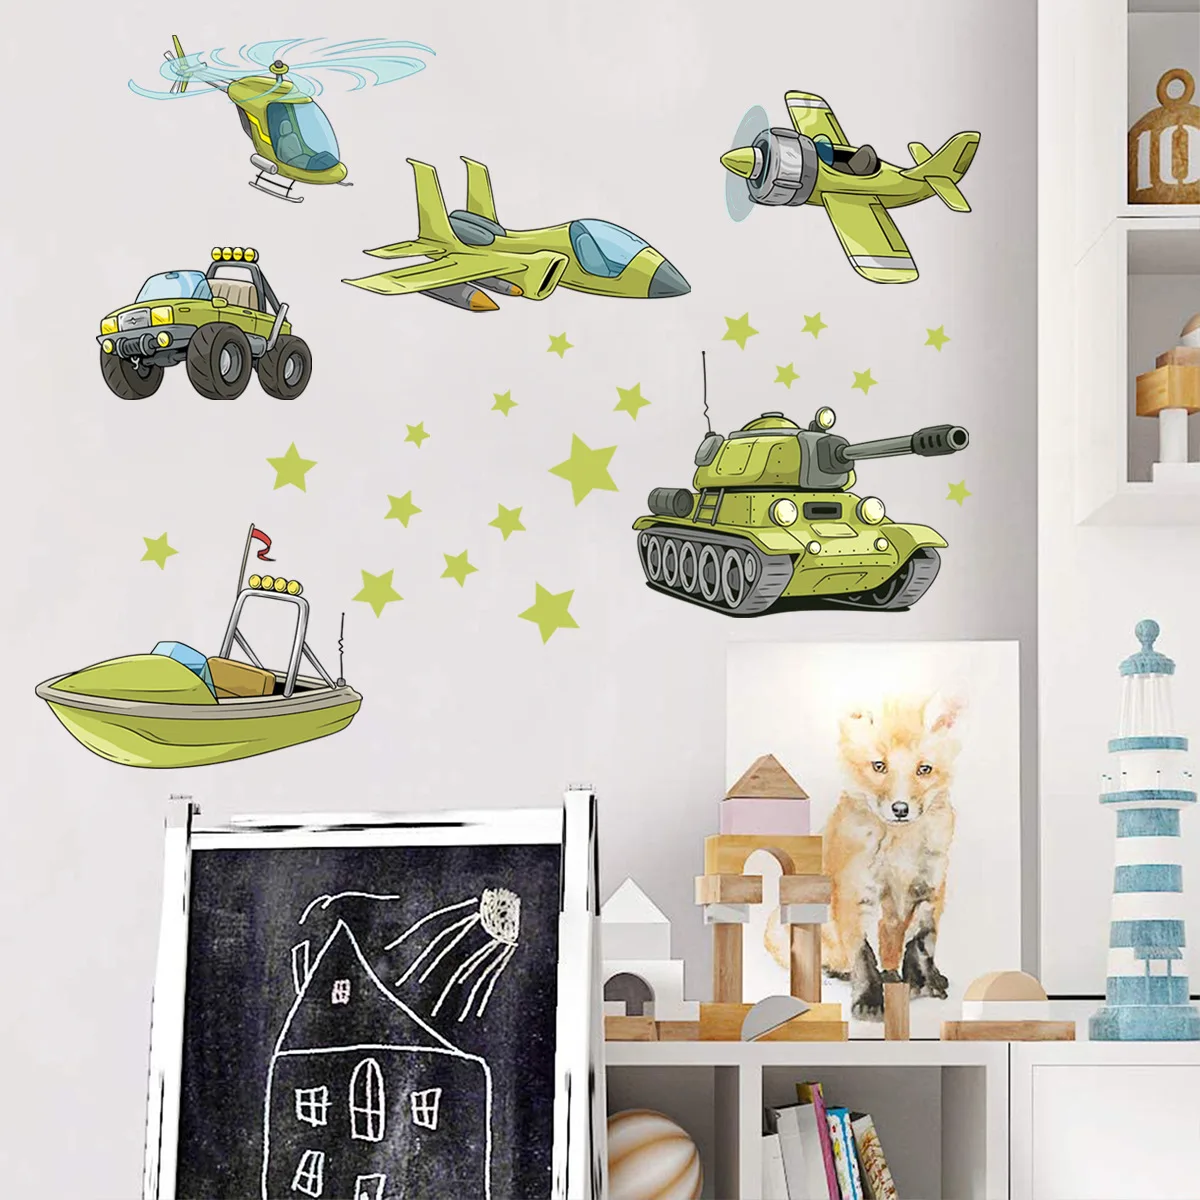 

Green Cartoon Wall Stickers Airplanes Cars Boats Tanks Vinyl Wall Decals Nursery Wall Decoration Kids Room Bedroom Decor Mural